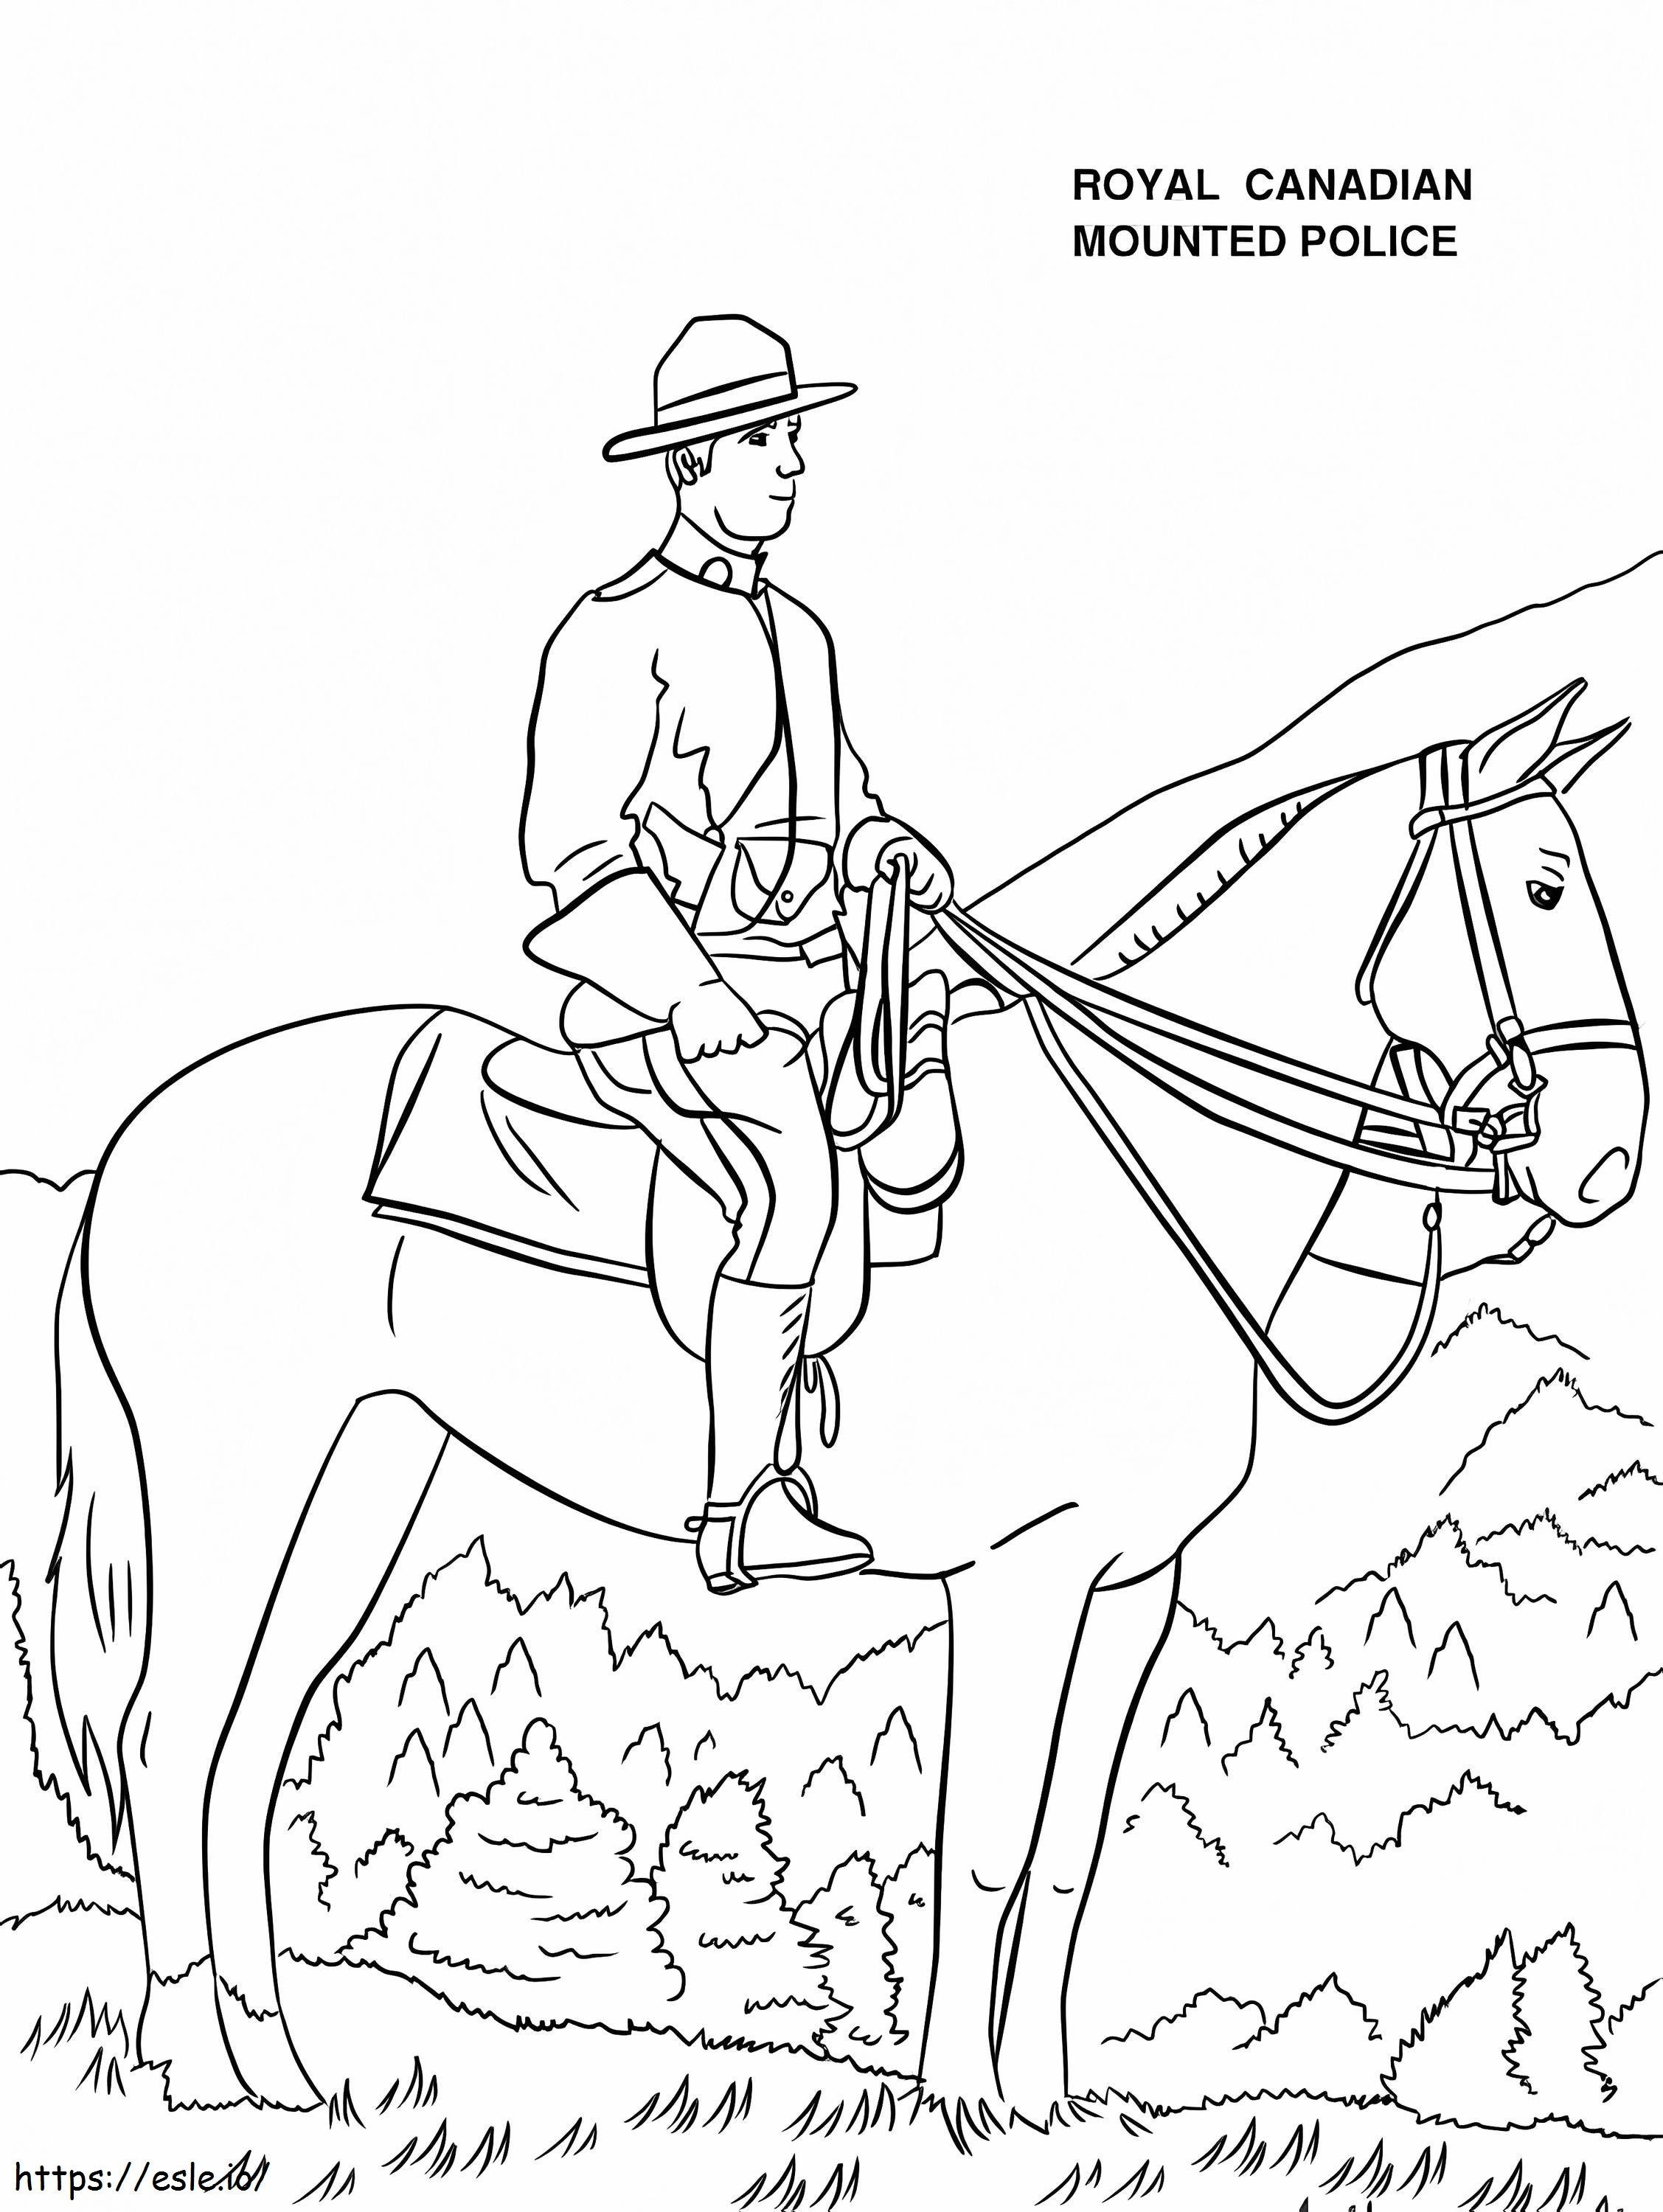 Royal Canadian Mounted Police coloring page